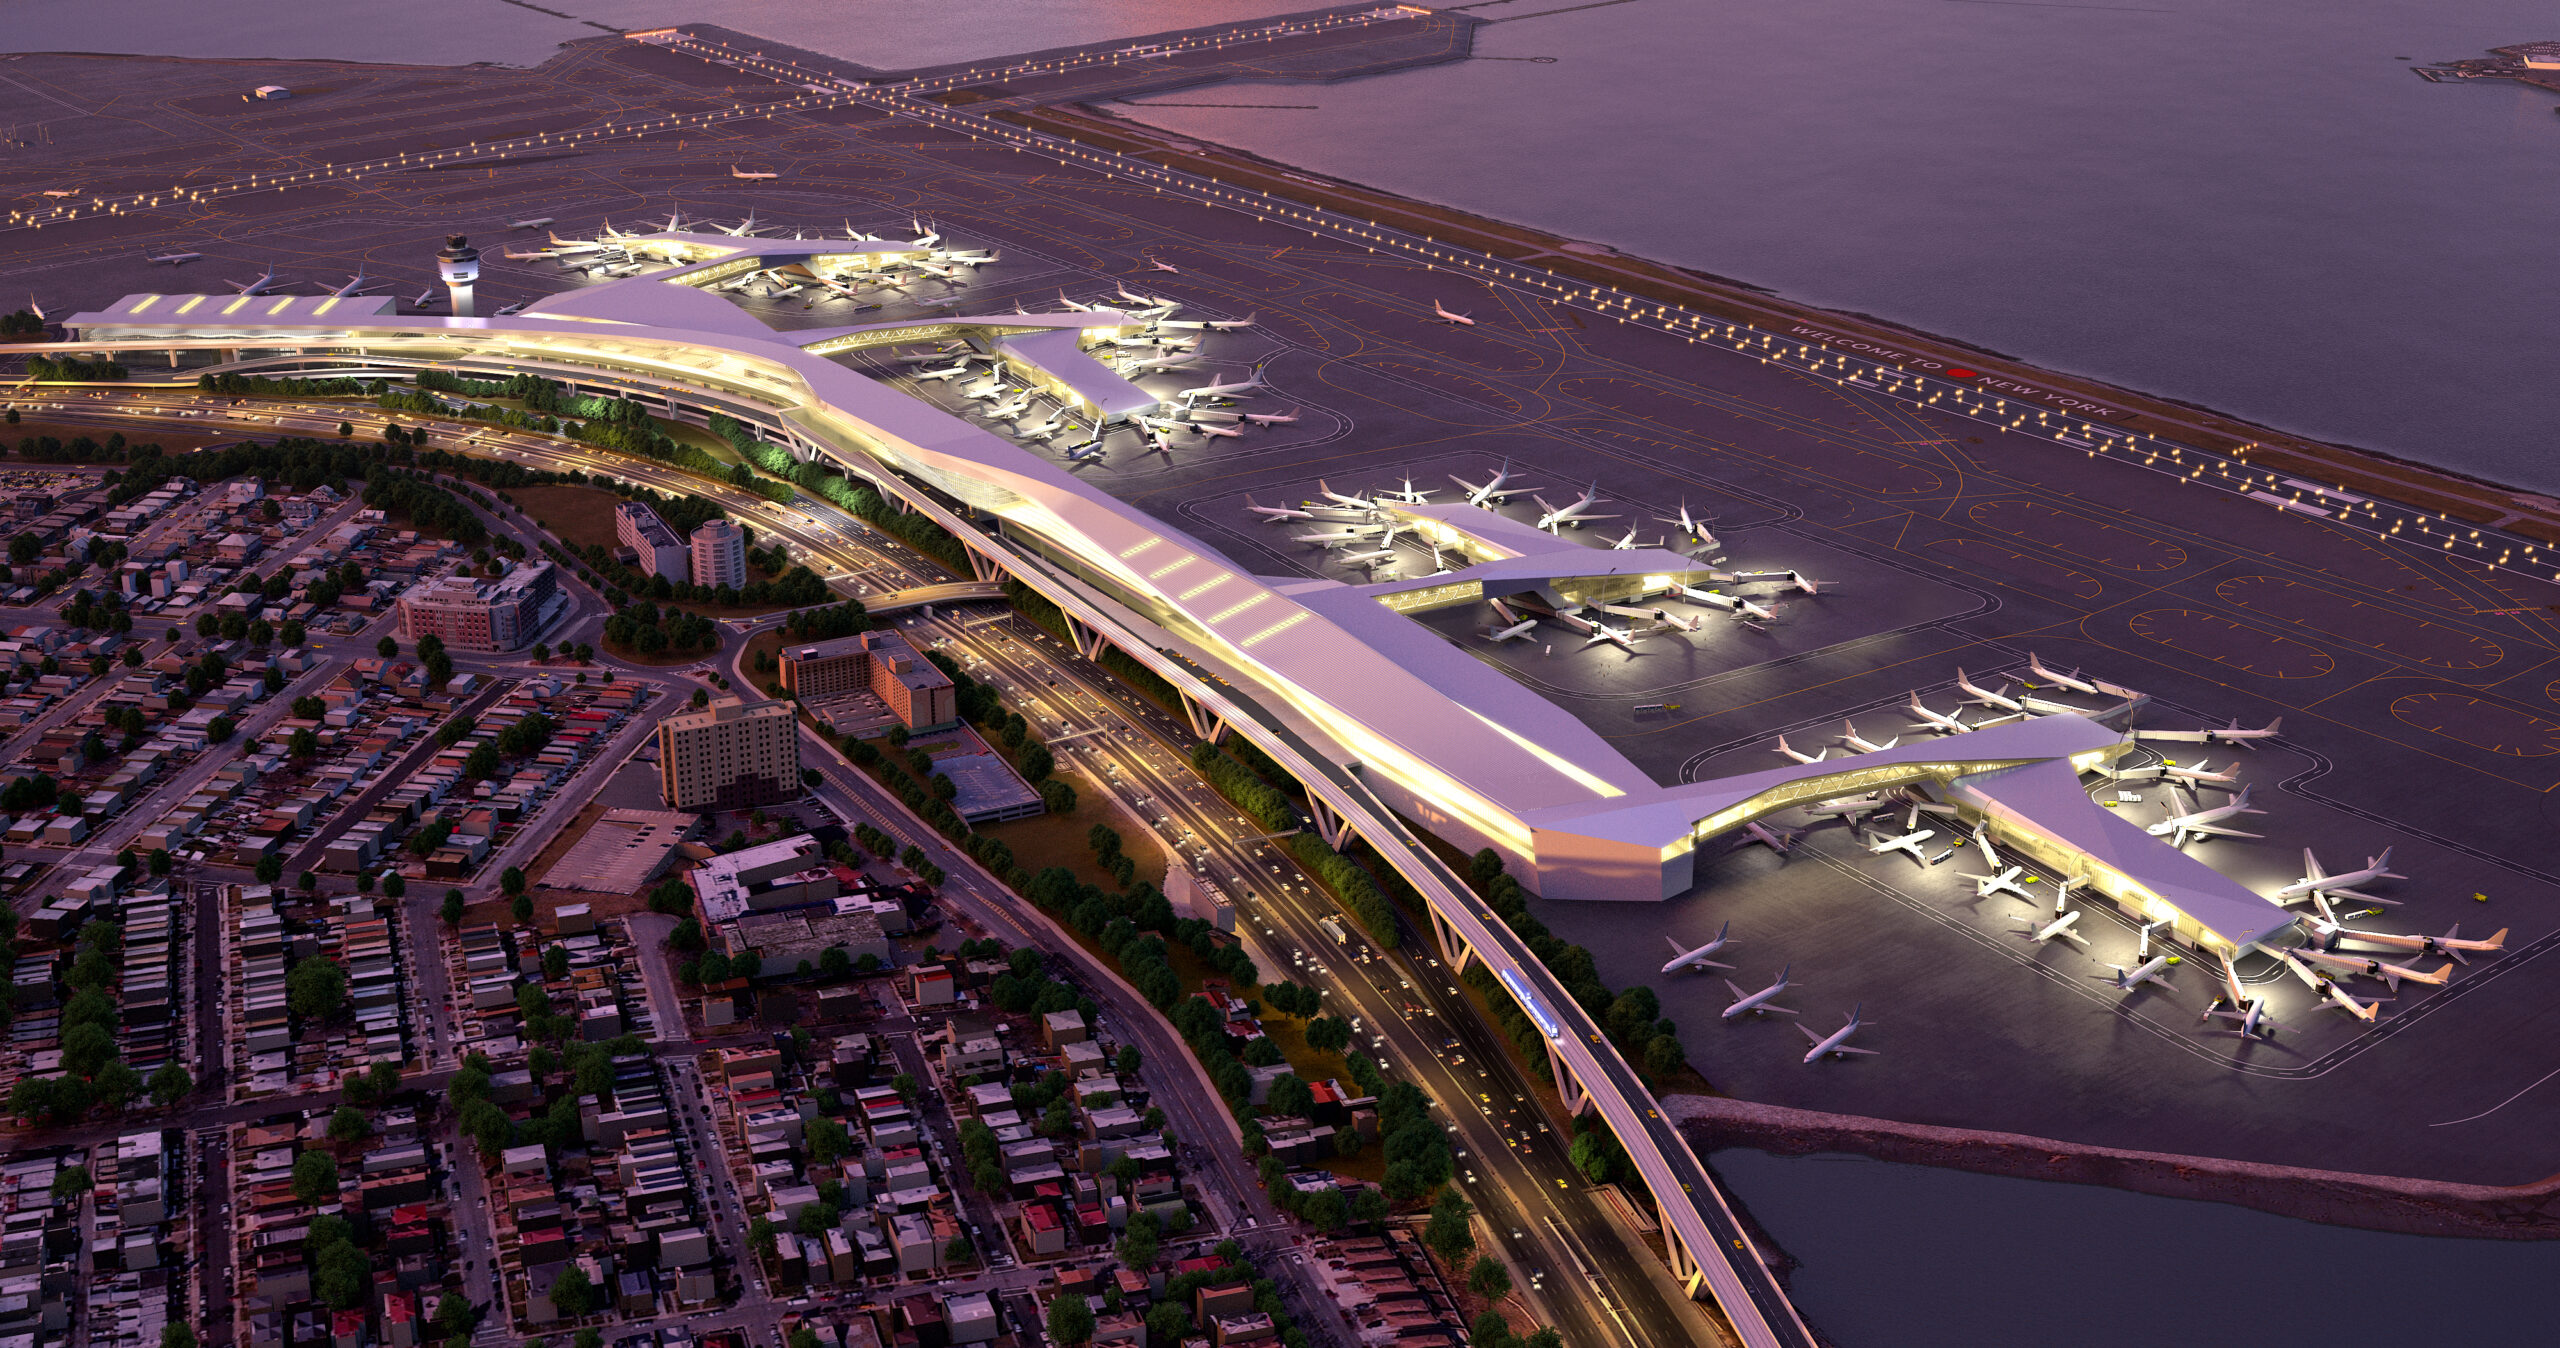 The Airport Of The Future Isn’t An Airport: It’s A City